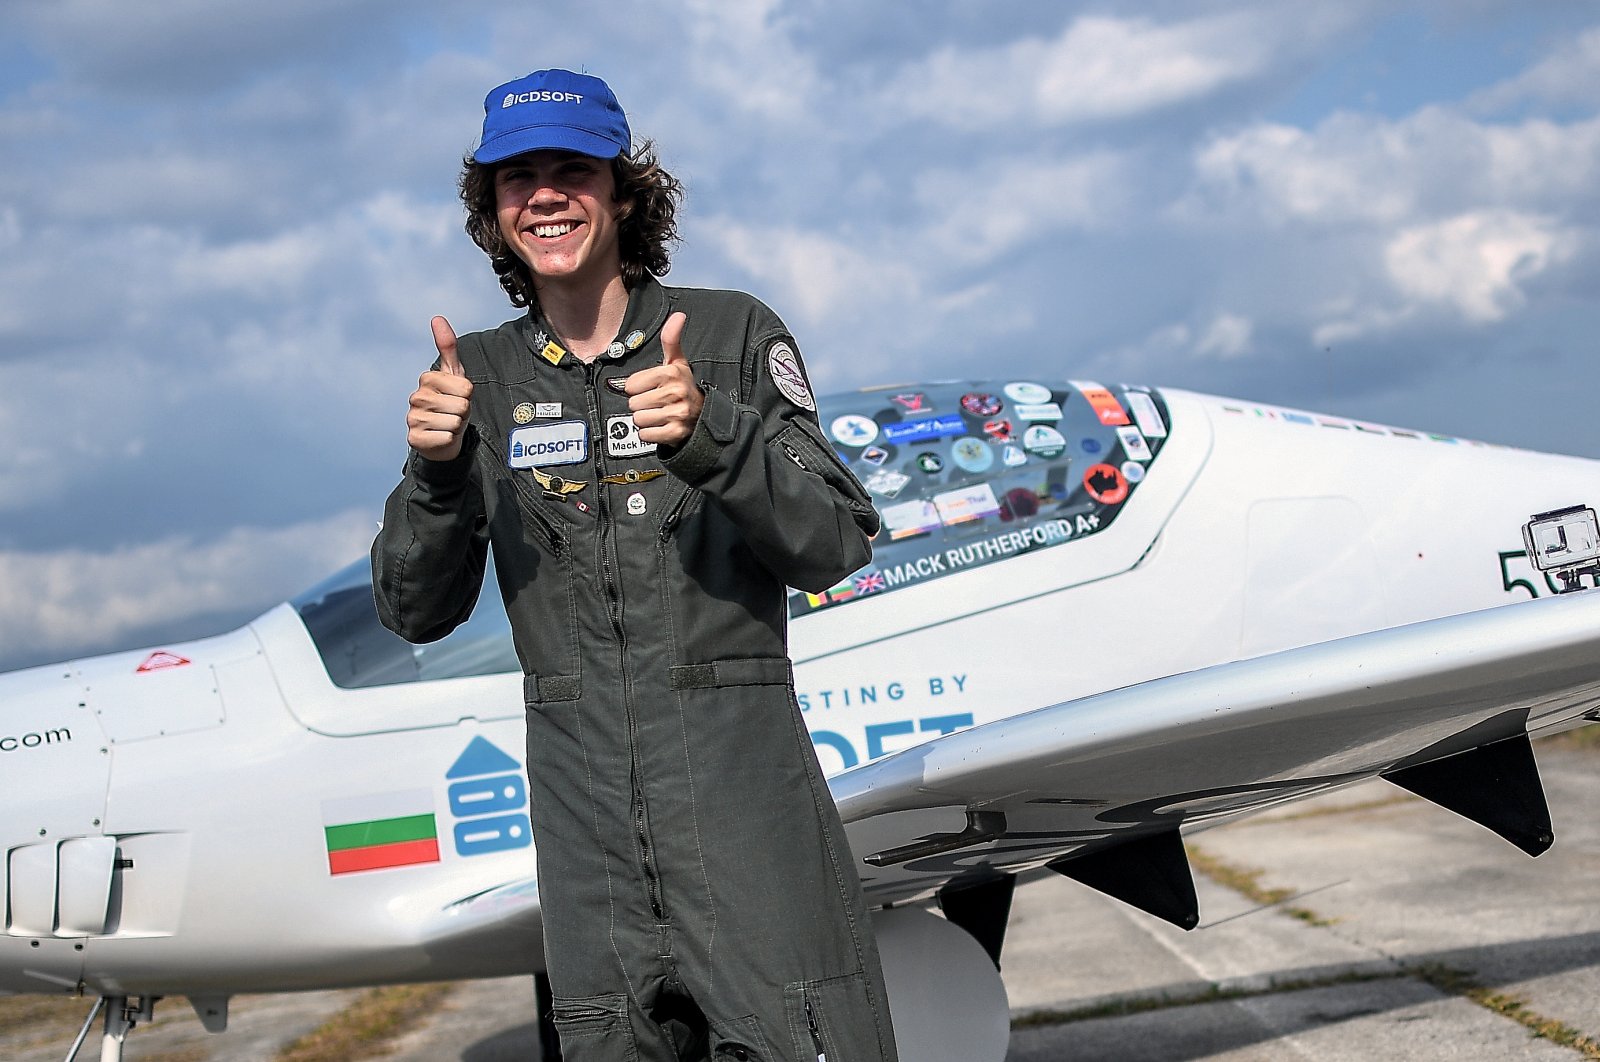 The 17-year-old Mack Rutherford posing for a picture after landing his airplane successfully at Skydive West Airport of Sofia, Bulgaria, Aug. 24, 2022. (EPA Photo)